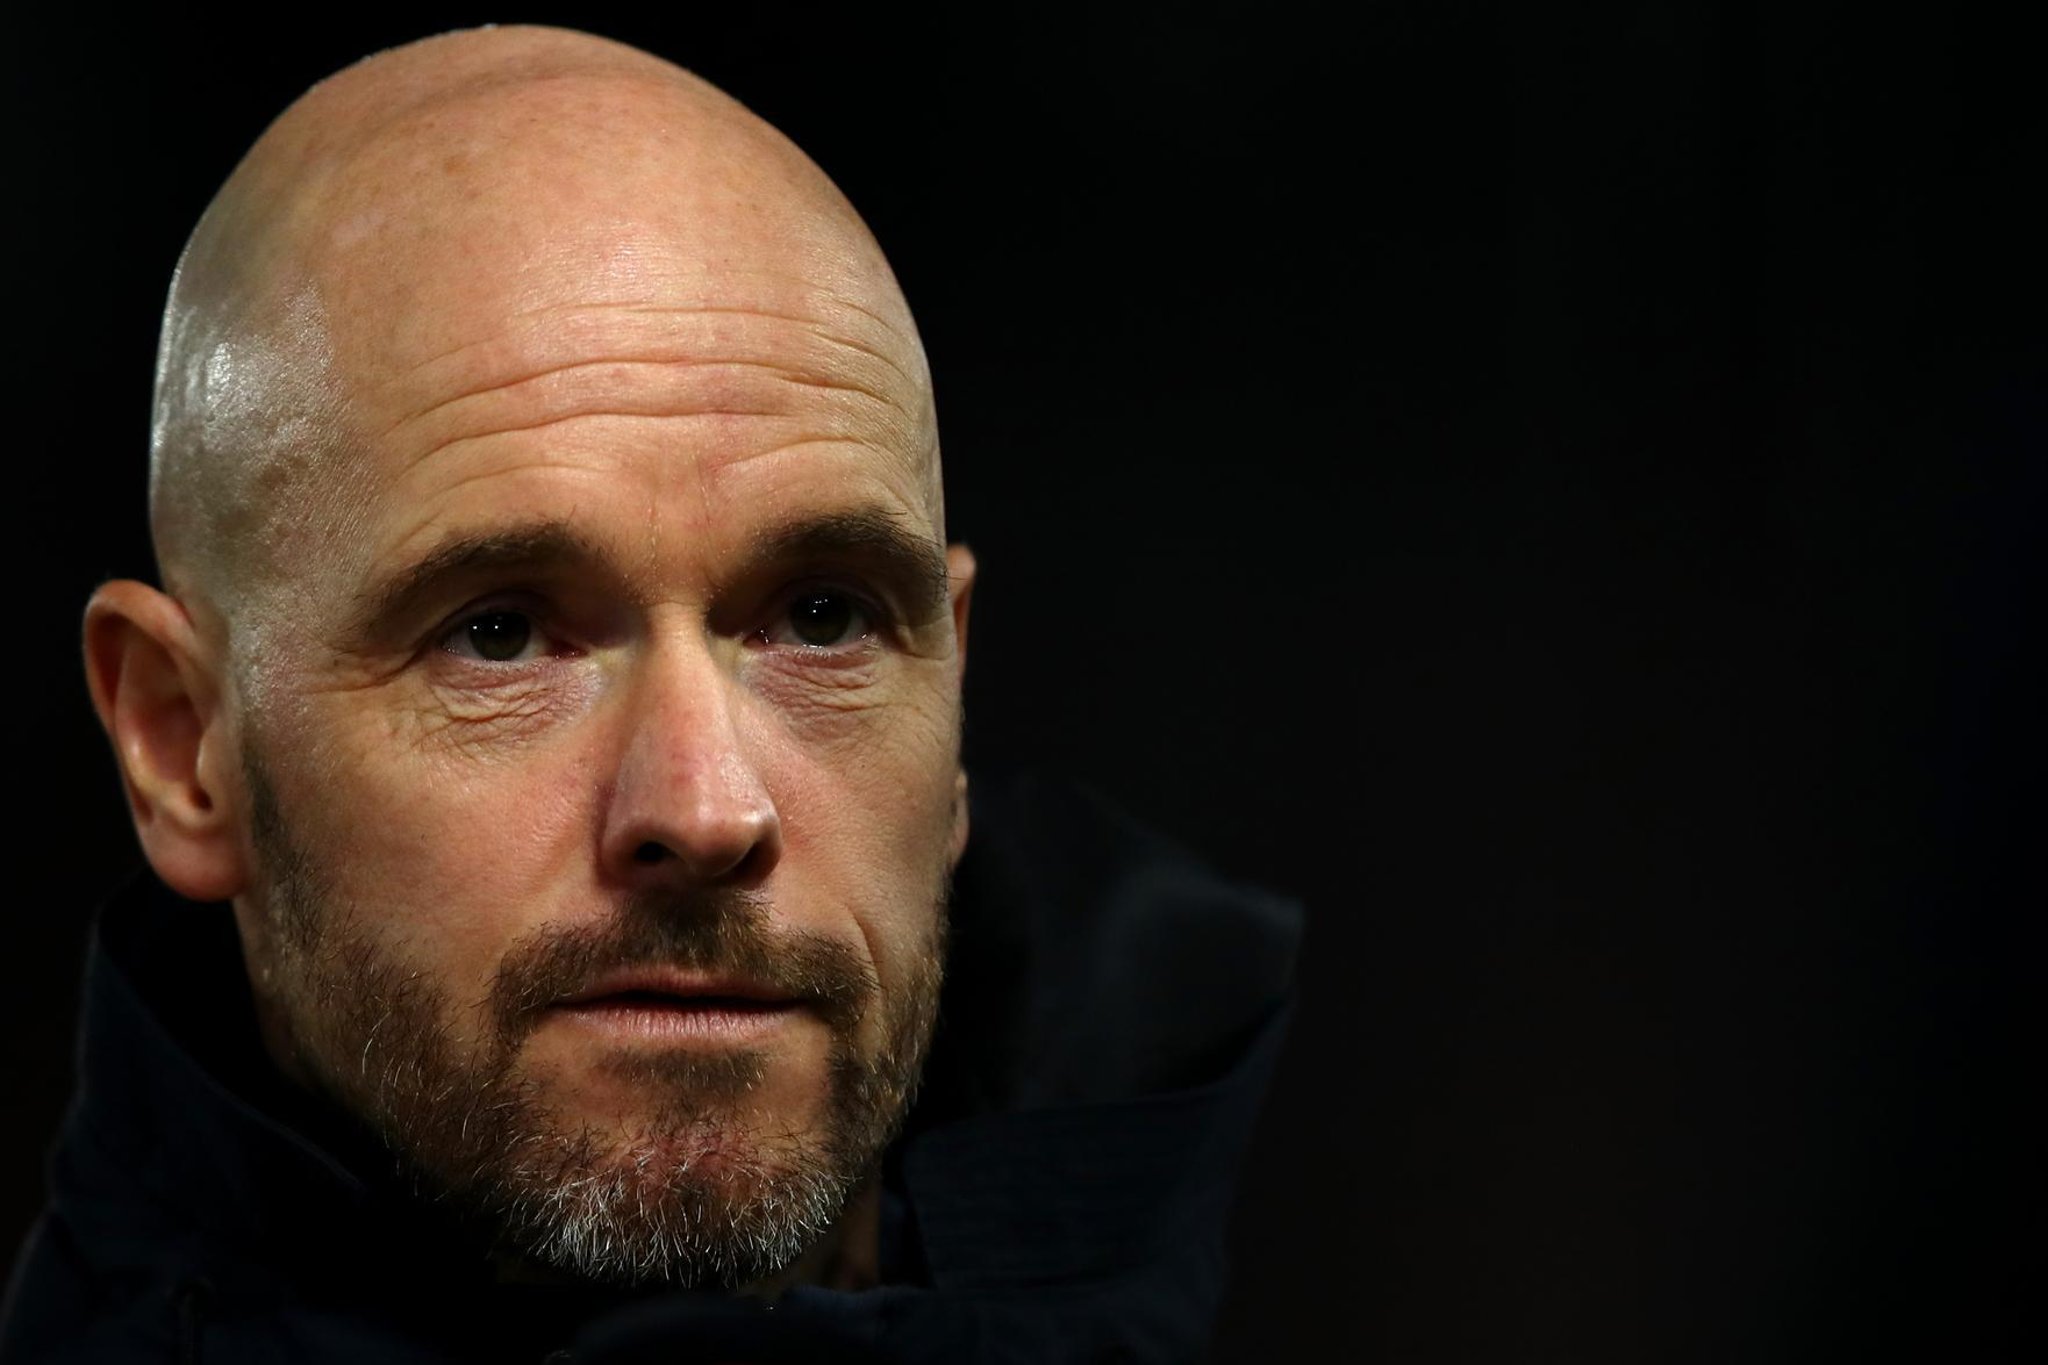 Erik ten Hag reportedly reaches agreement to become Manchester United boss